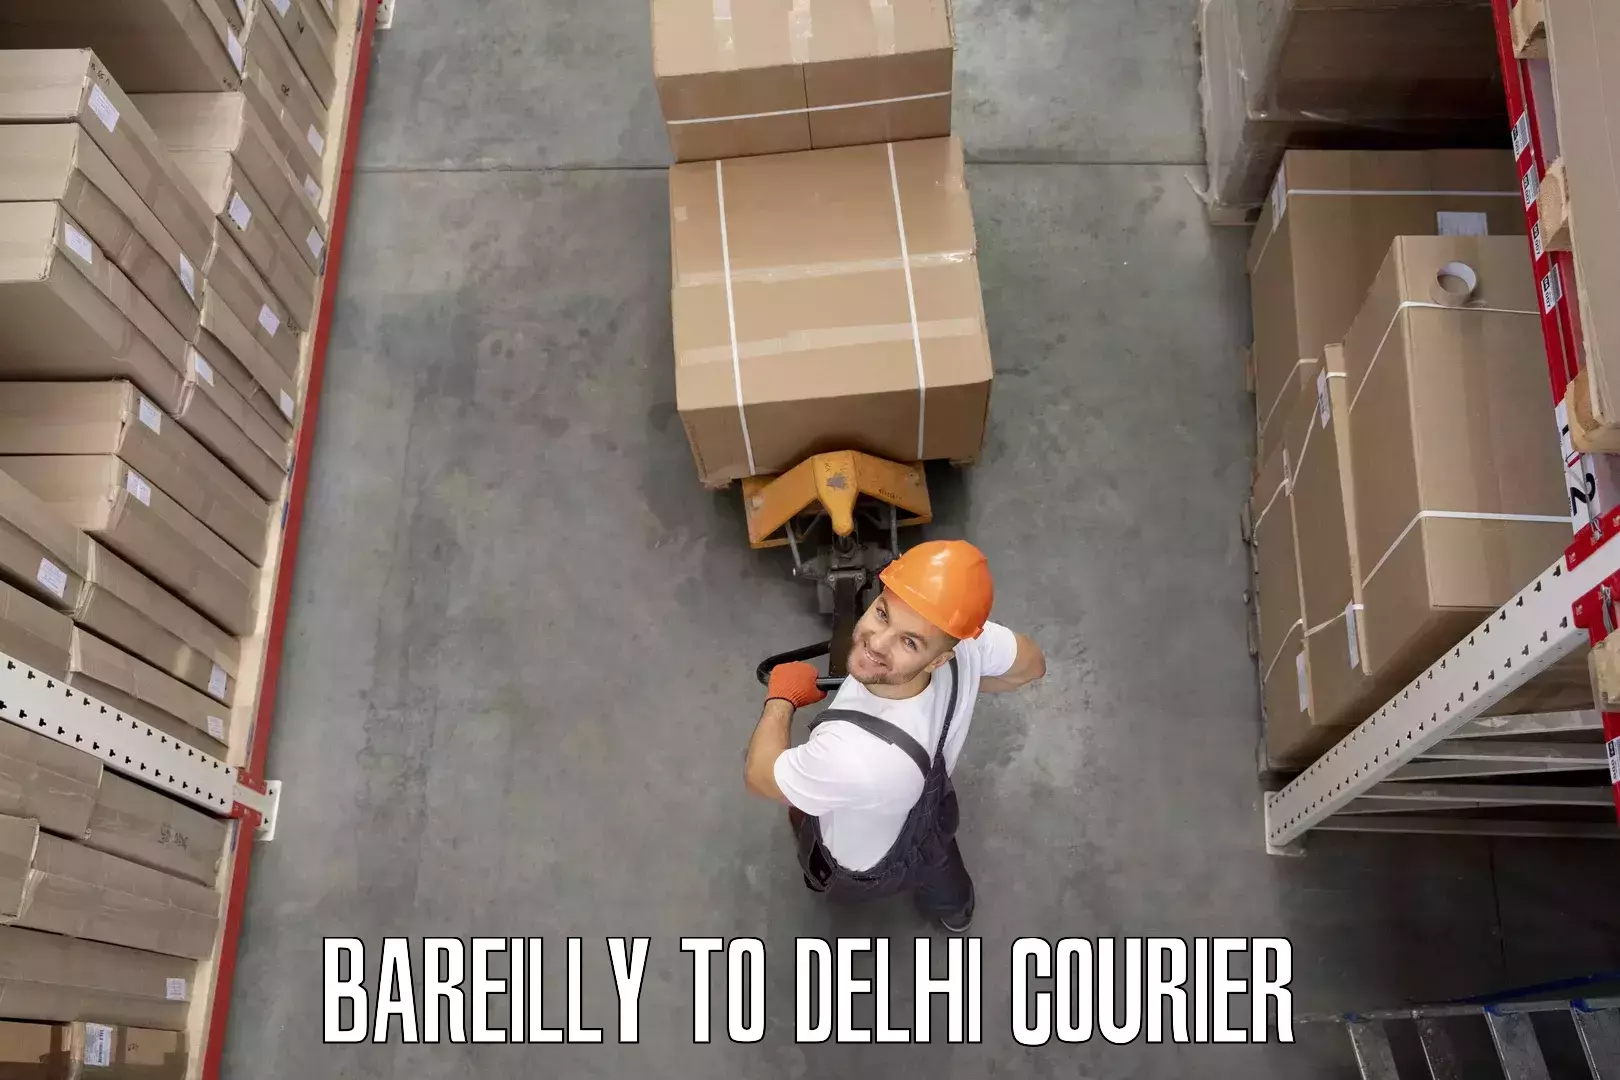 Furniture transport specialists Bareilly to Lodhi Road